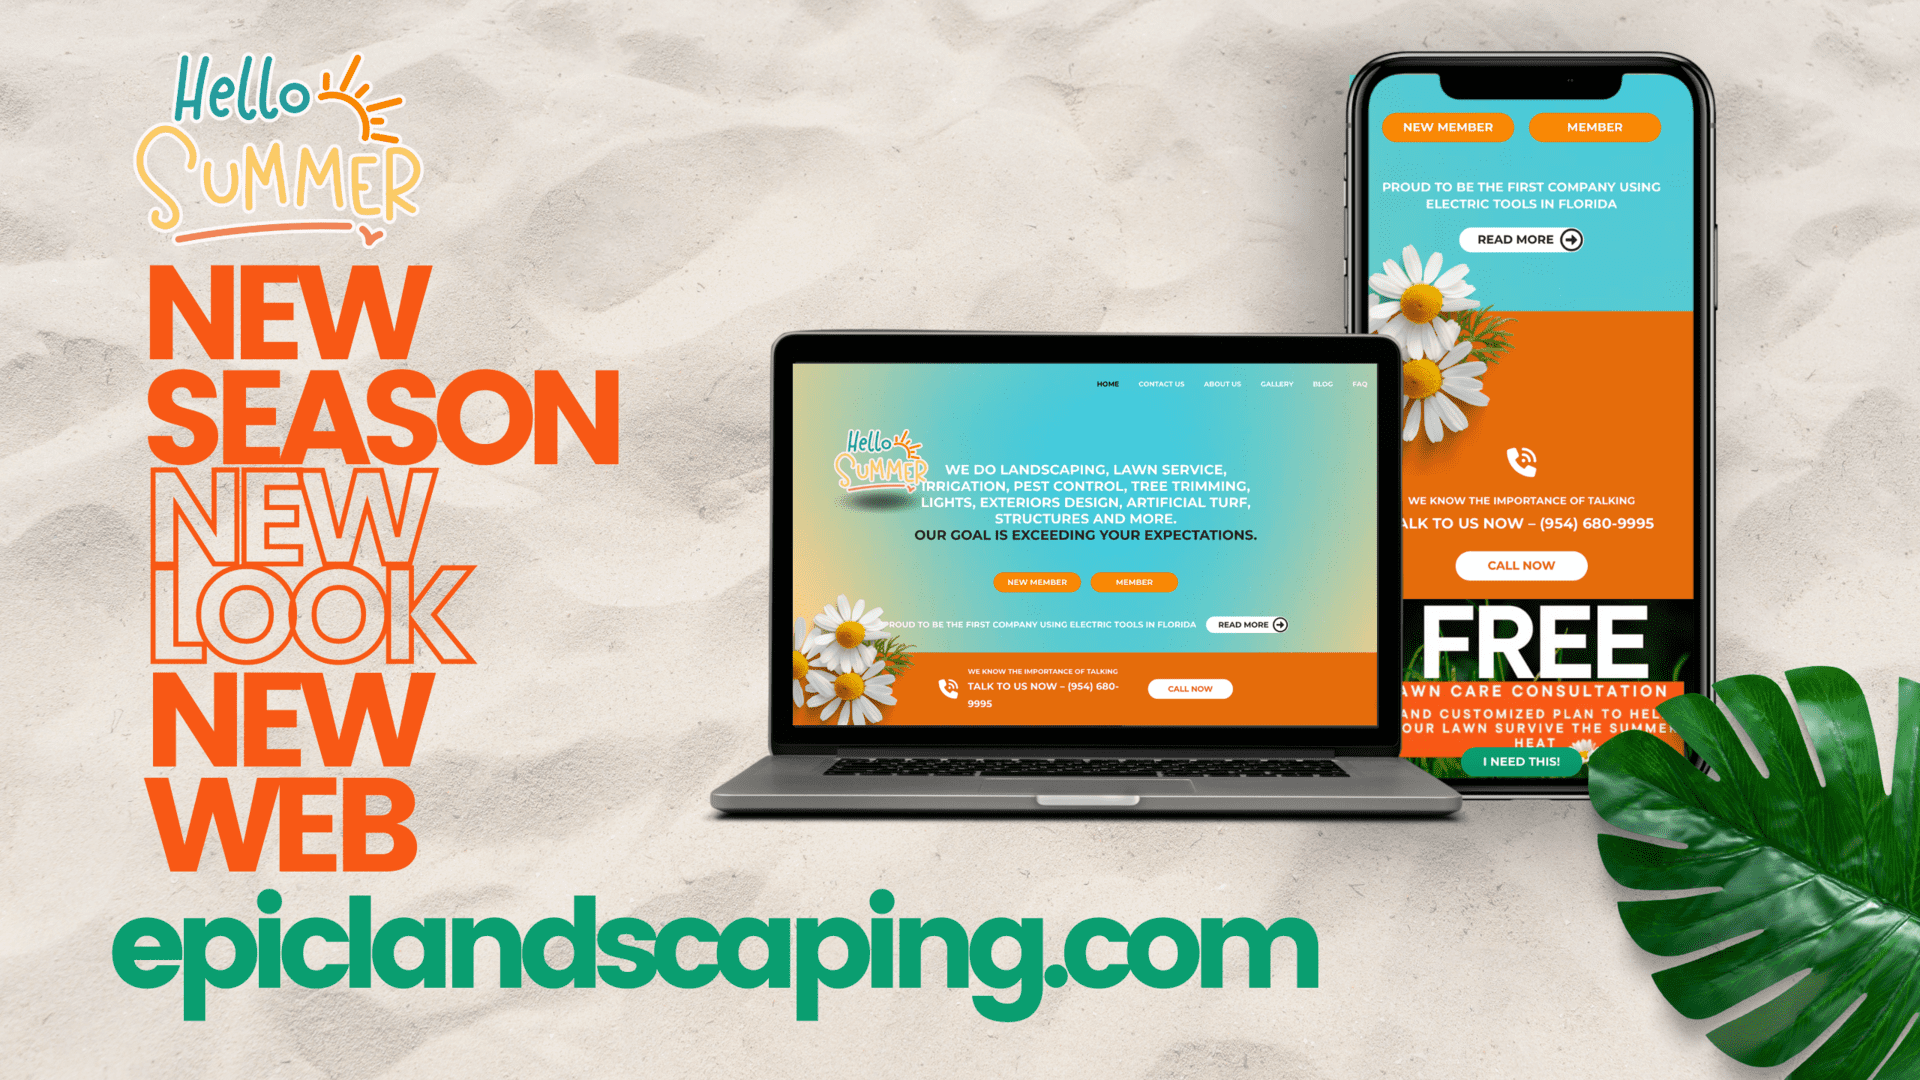 New Season New Look New Web epiclandscaping.com